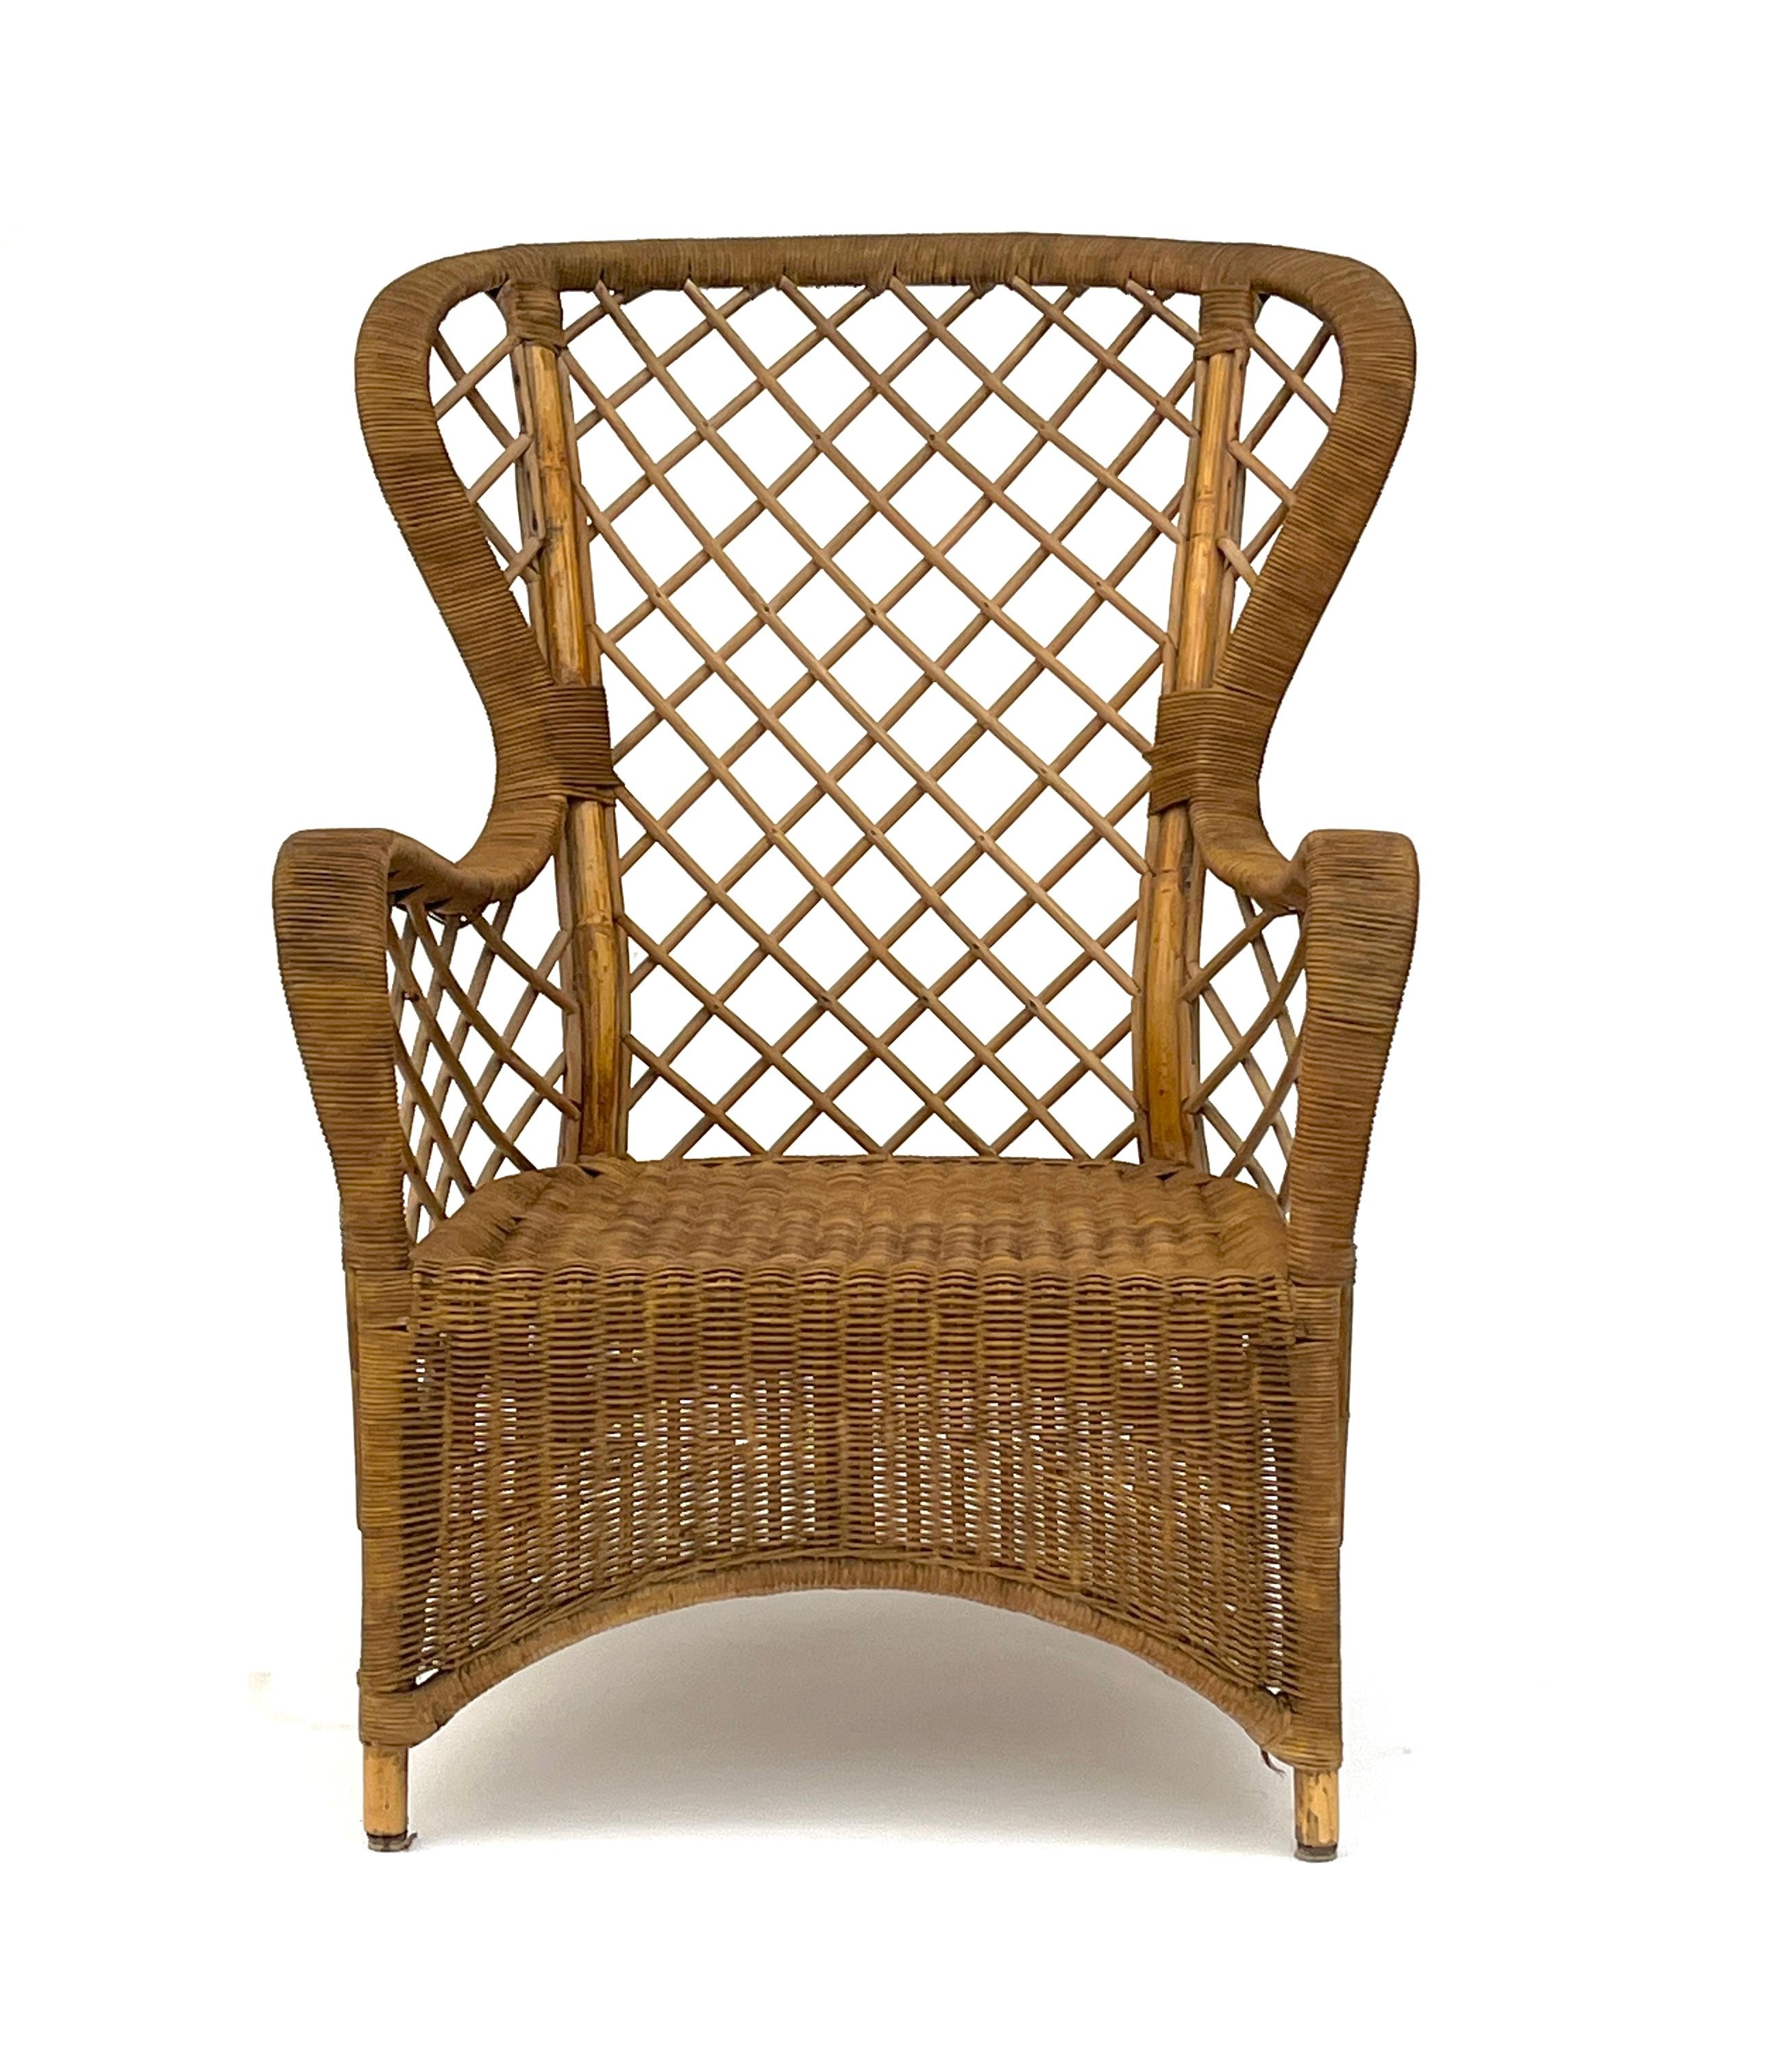 Mid-20th Century Rattan Lounge Chair (Footrest) Attributed to Louis Sognot, Chevallier, 1952 For Sale